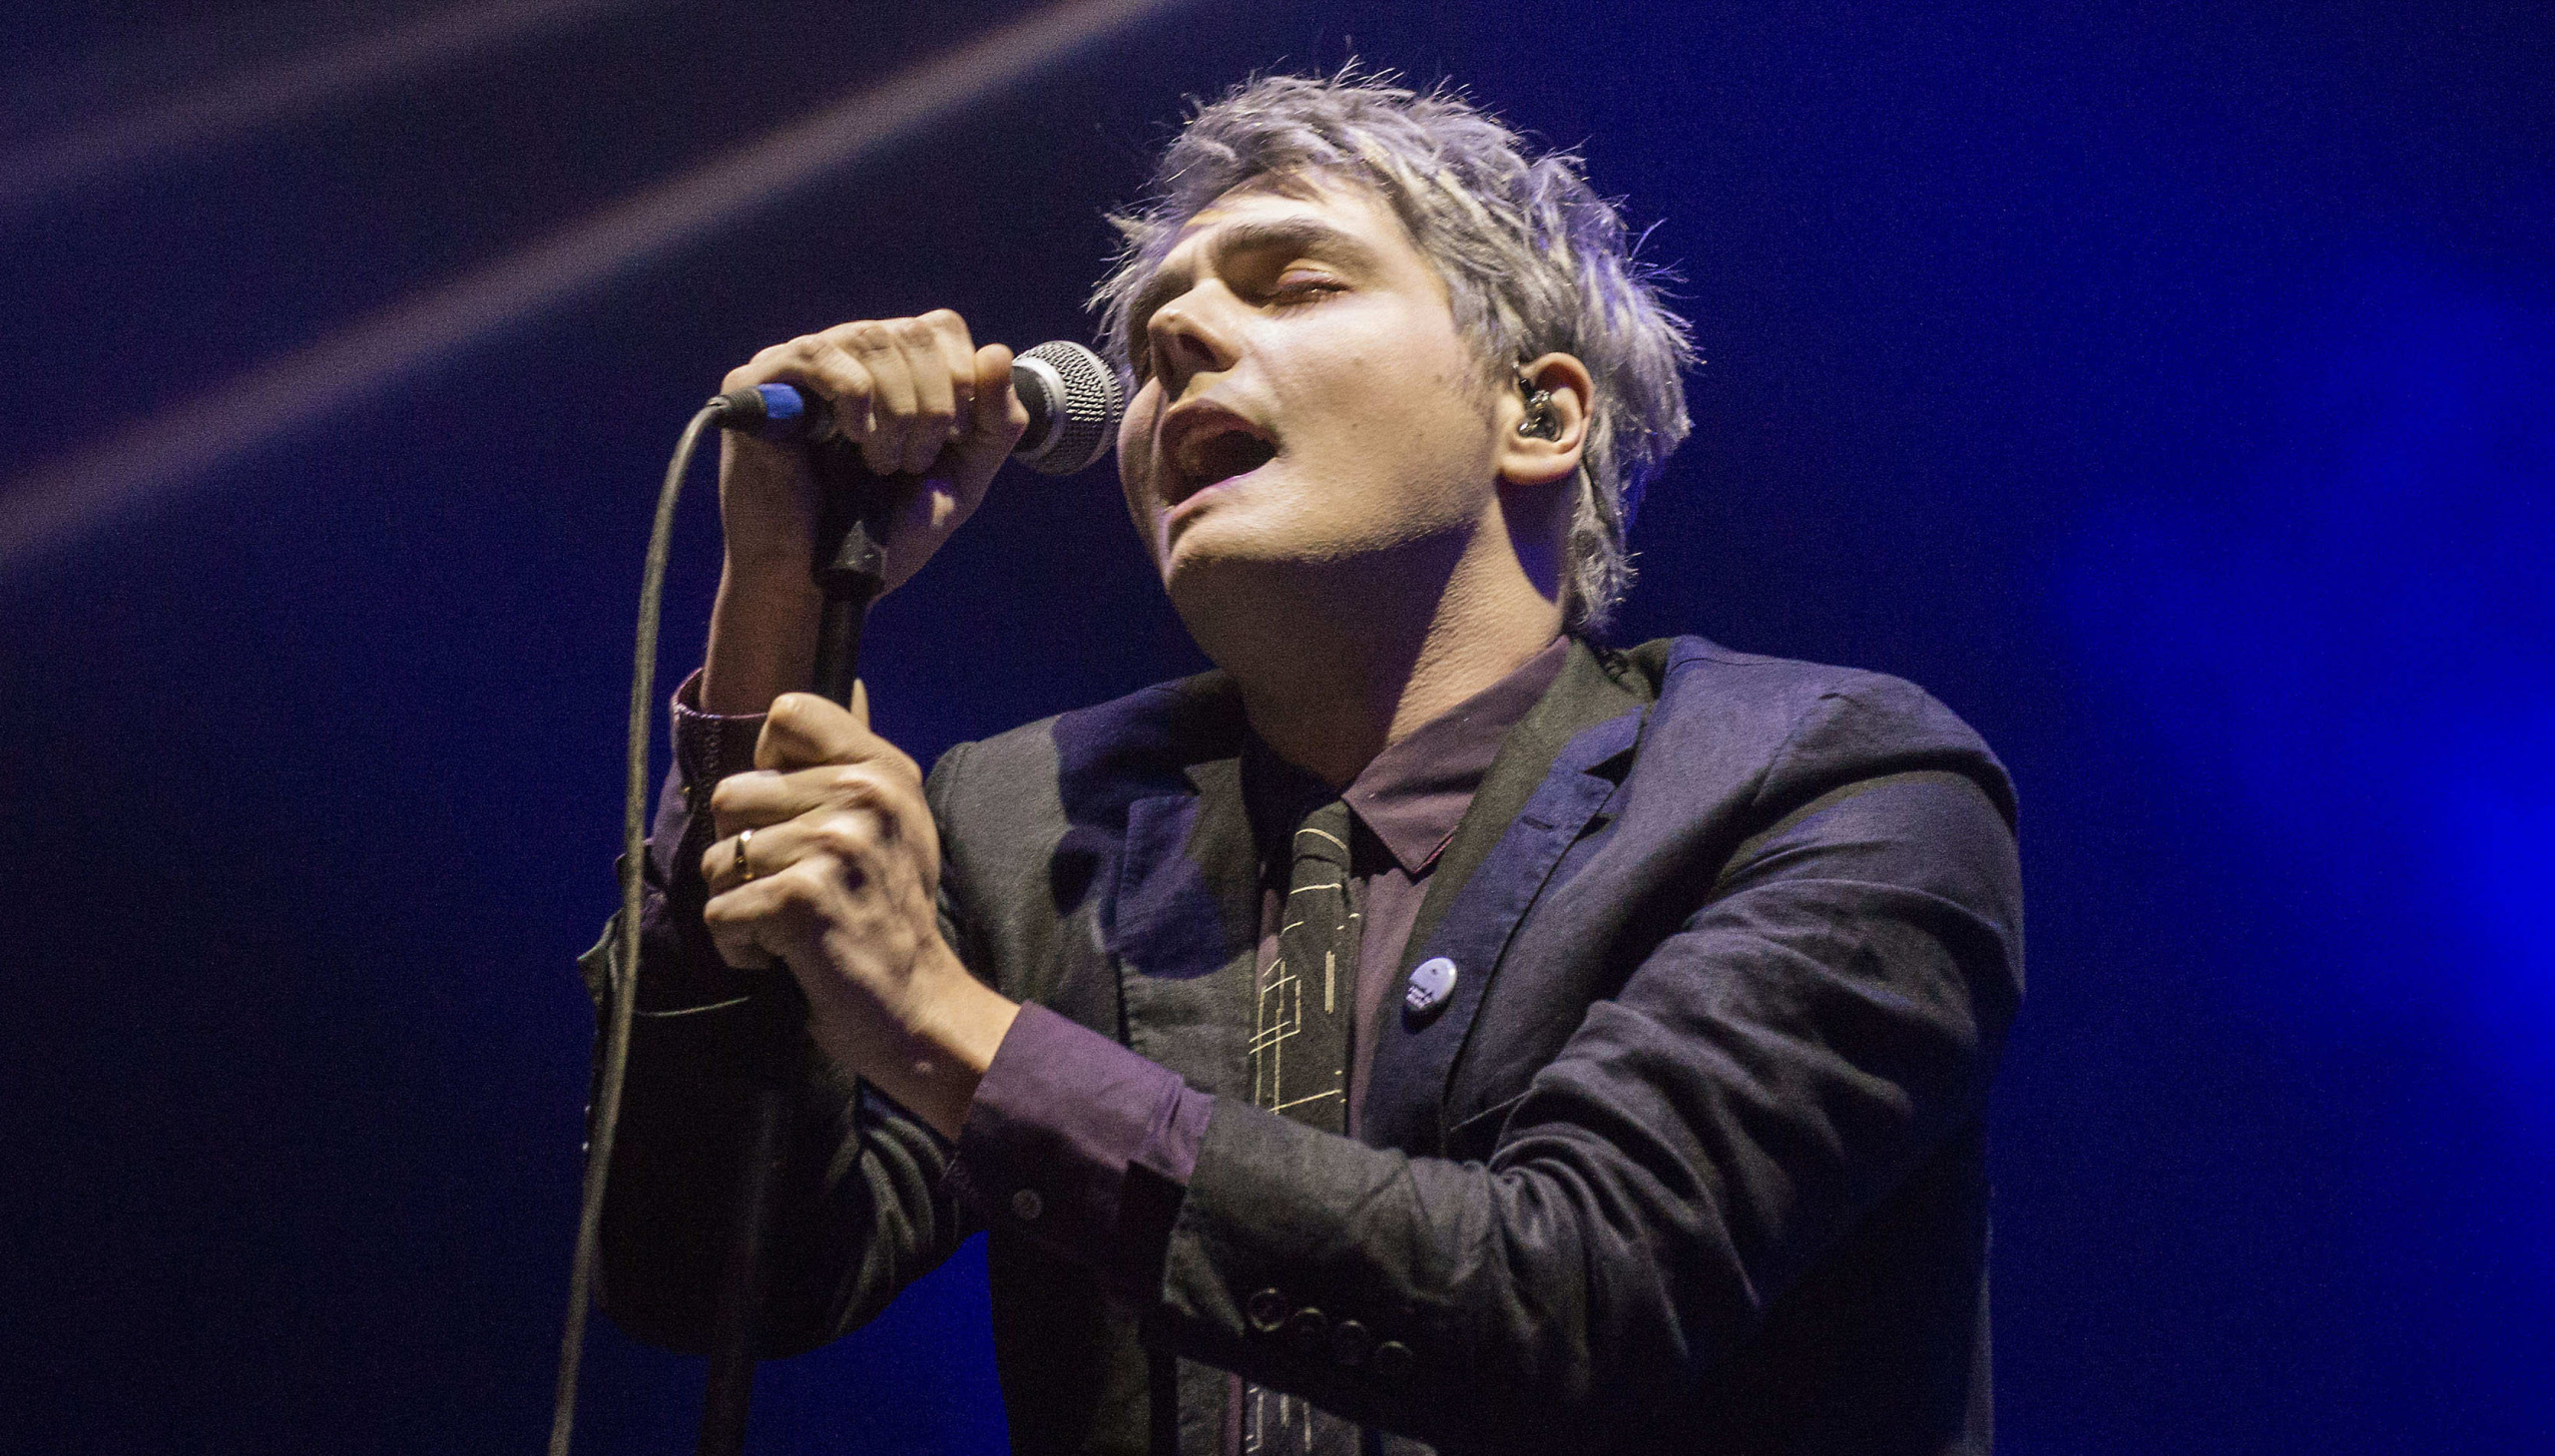 Video, the setlist, and everything you need to know about My Chemical Romance’s Riot Fest performance